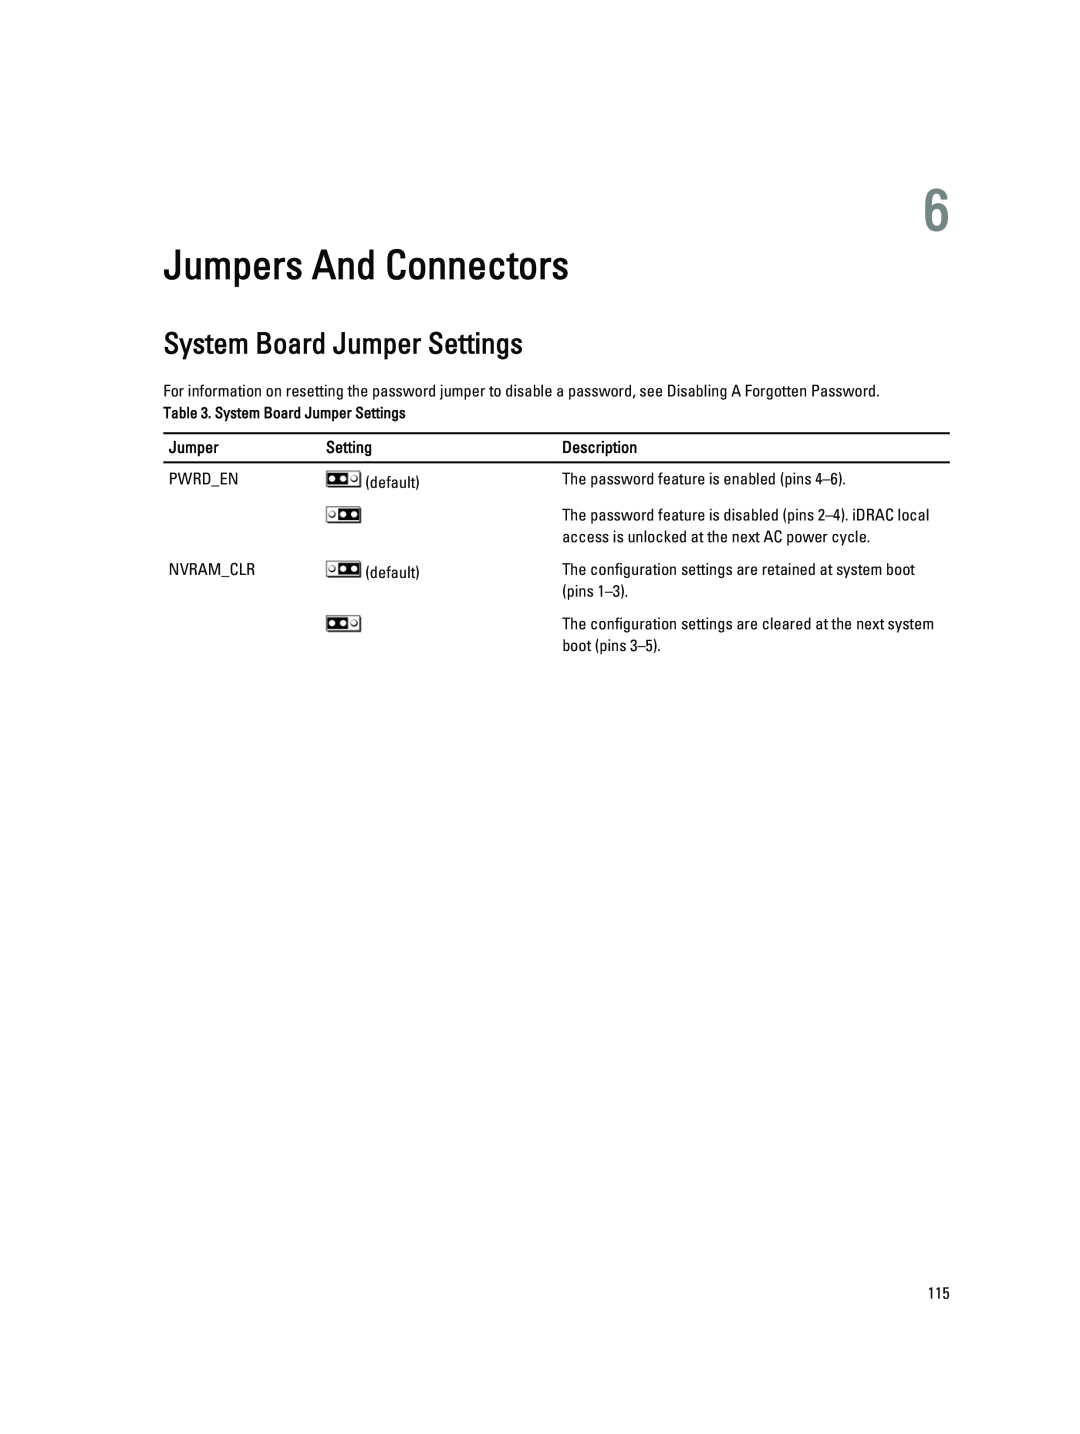 Dell R820 owner manual Jumpers And Connectors, System Board Jumper Settings 